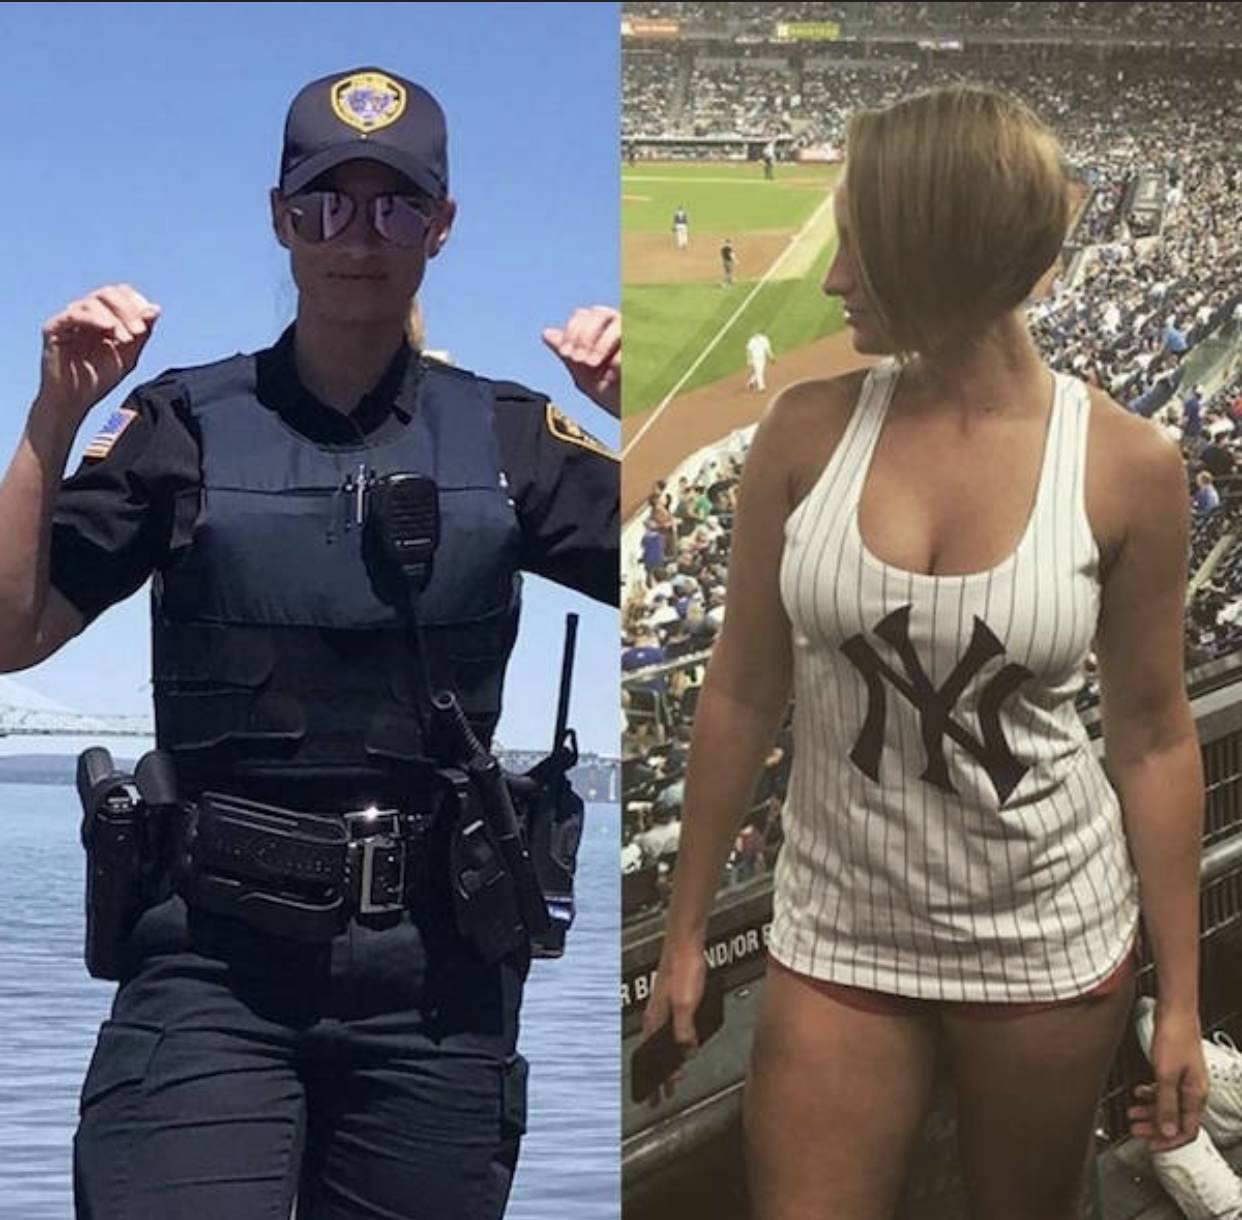 Picture of a hot NYPD babe in uniform, and a pictur of her wearing a NY Yankees tanktop with cleavage